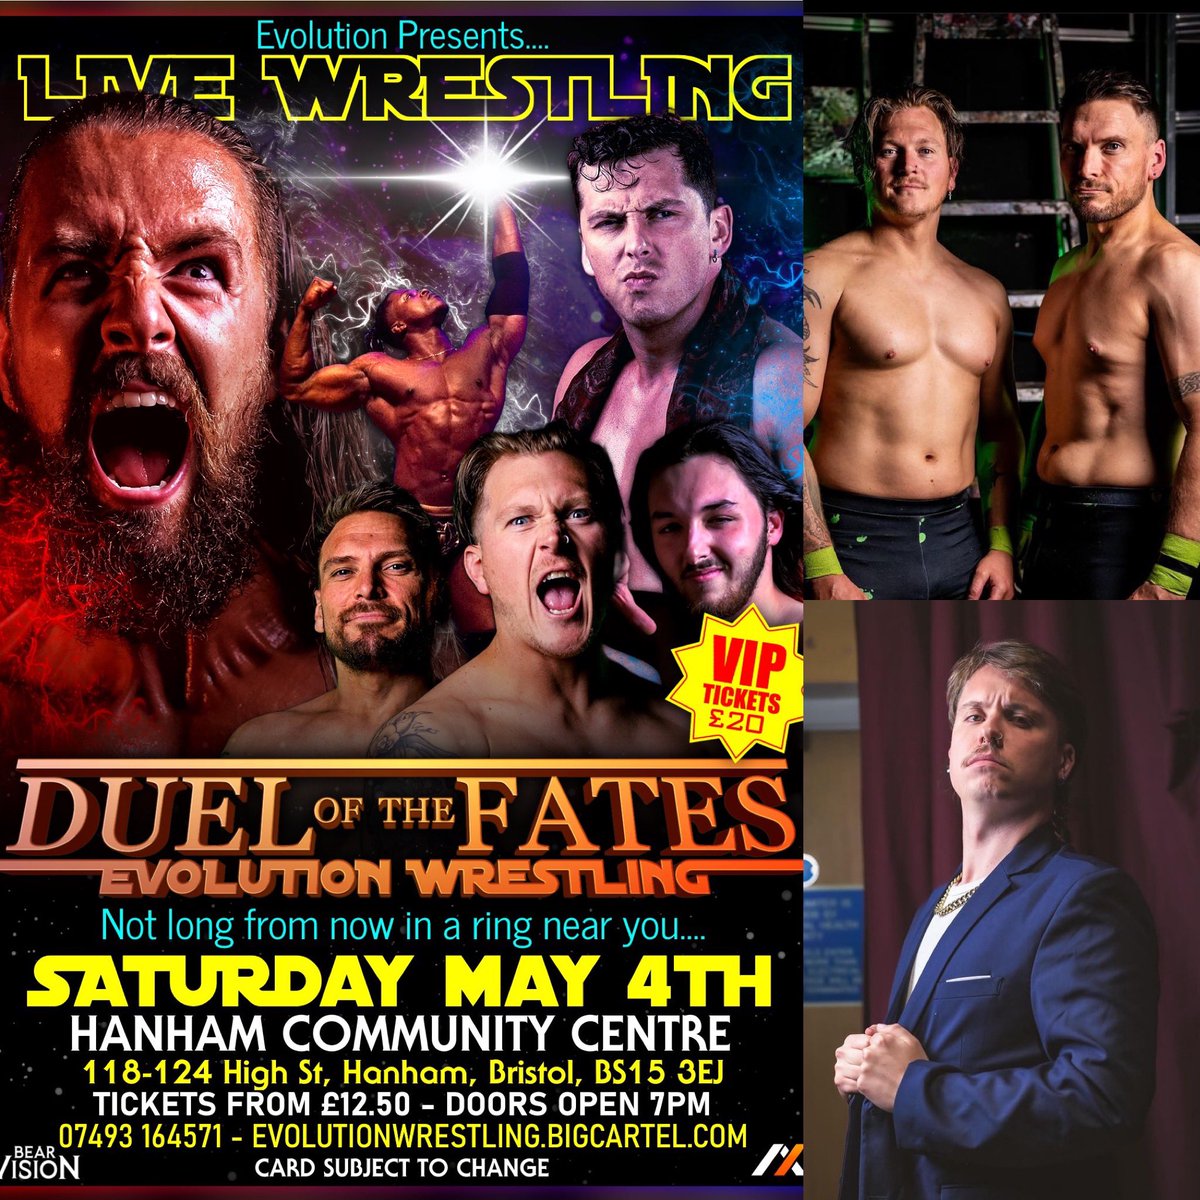 💫 EVW Presents “Duel of the Fates” May 4th, Hanham Bristol March 30th the Lane Brothers were cheated out of their title match! Commissioner Bowie Quinn has decided to give the lanes a special opportunity May 4th… Evolutionwrestling.bigcartel.com